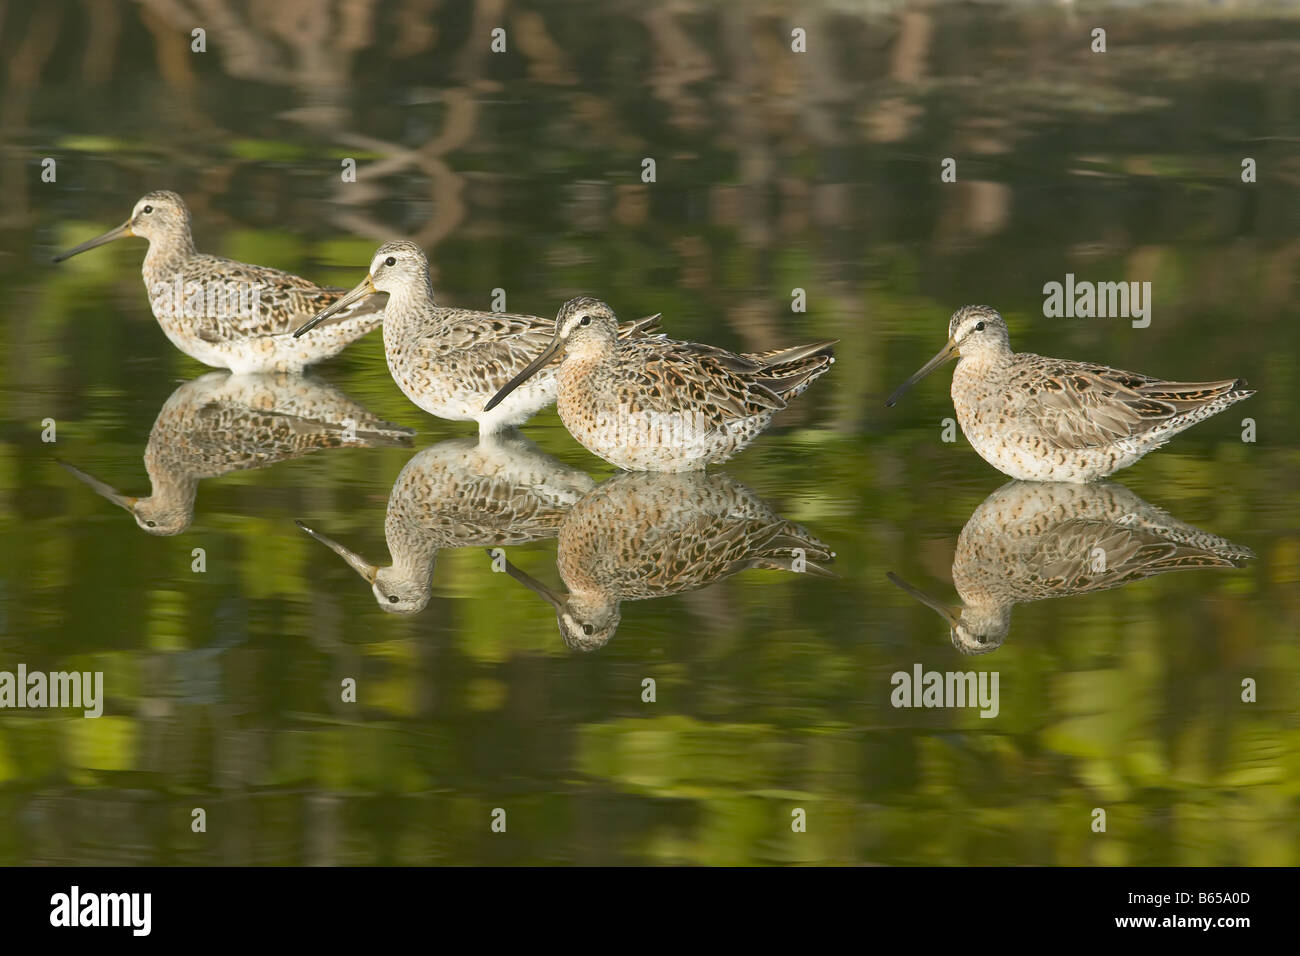 Four Short-billed Dowitchers (Limnodromus griseus) standing in shallow water with green trees reflected Stock Photo